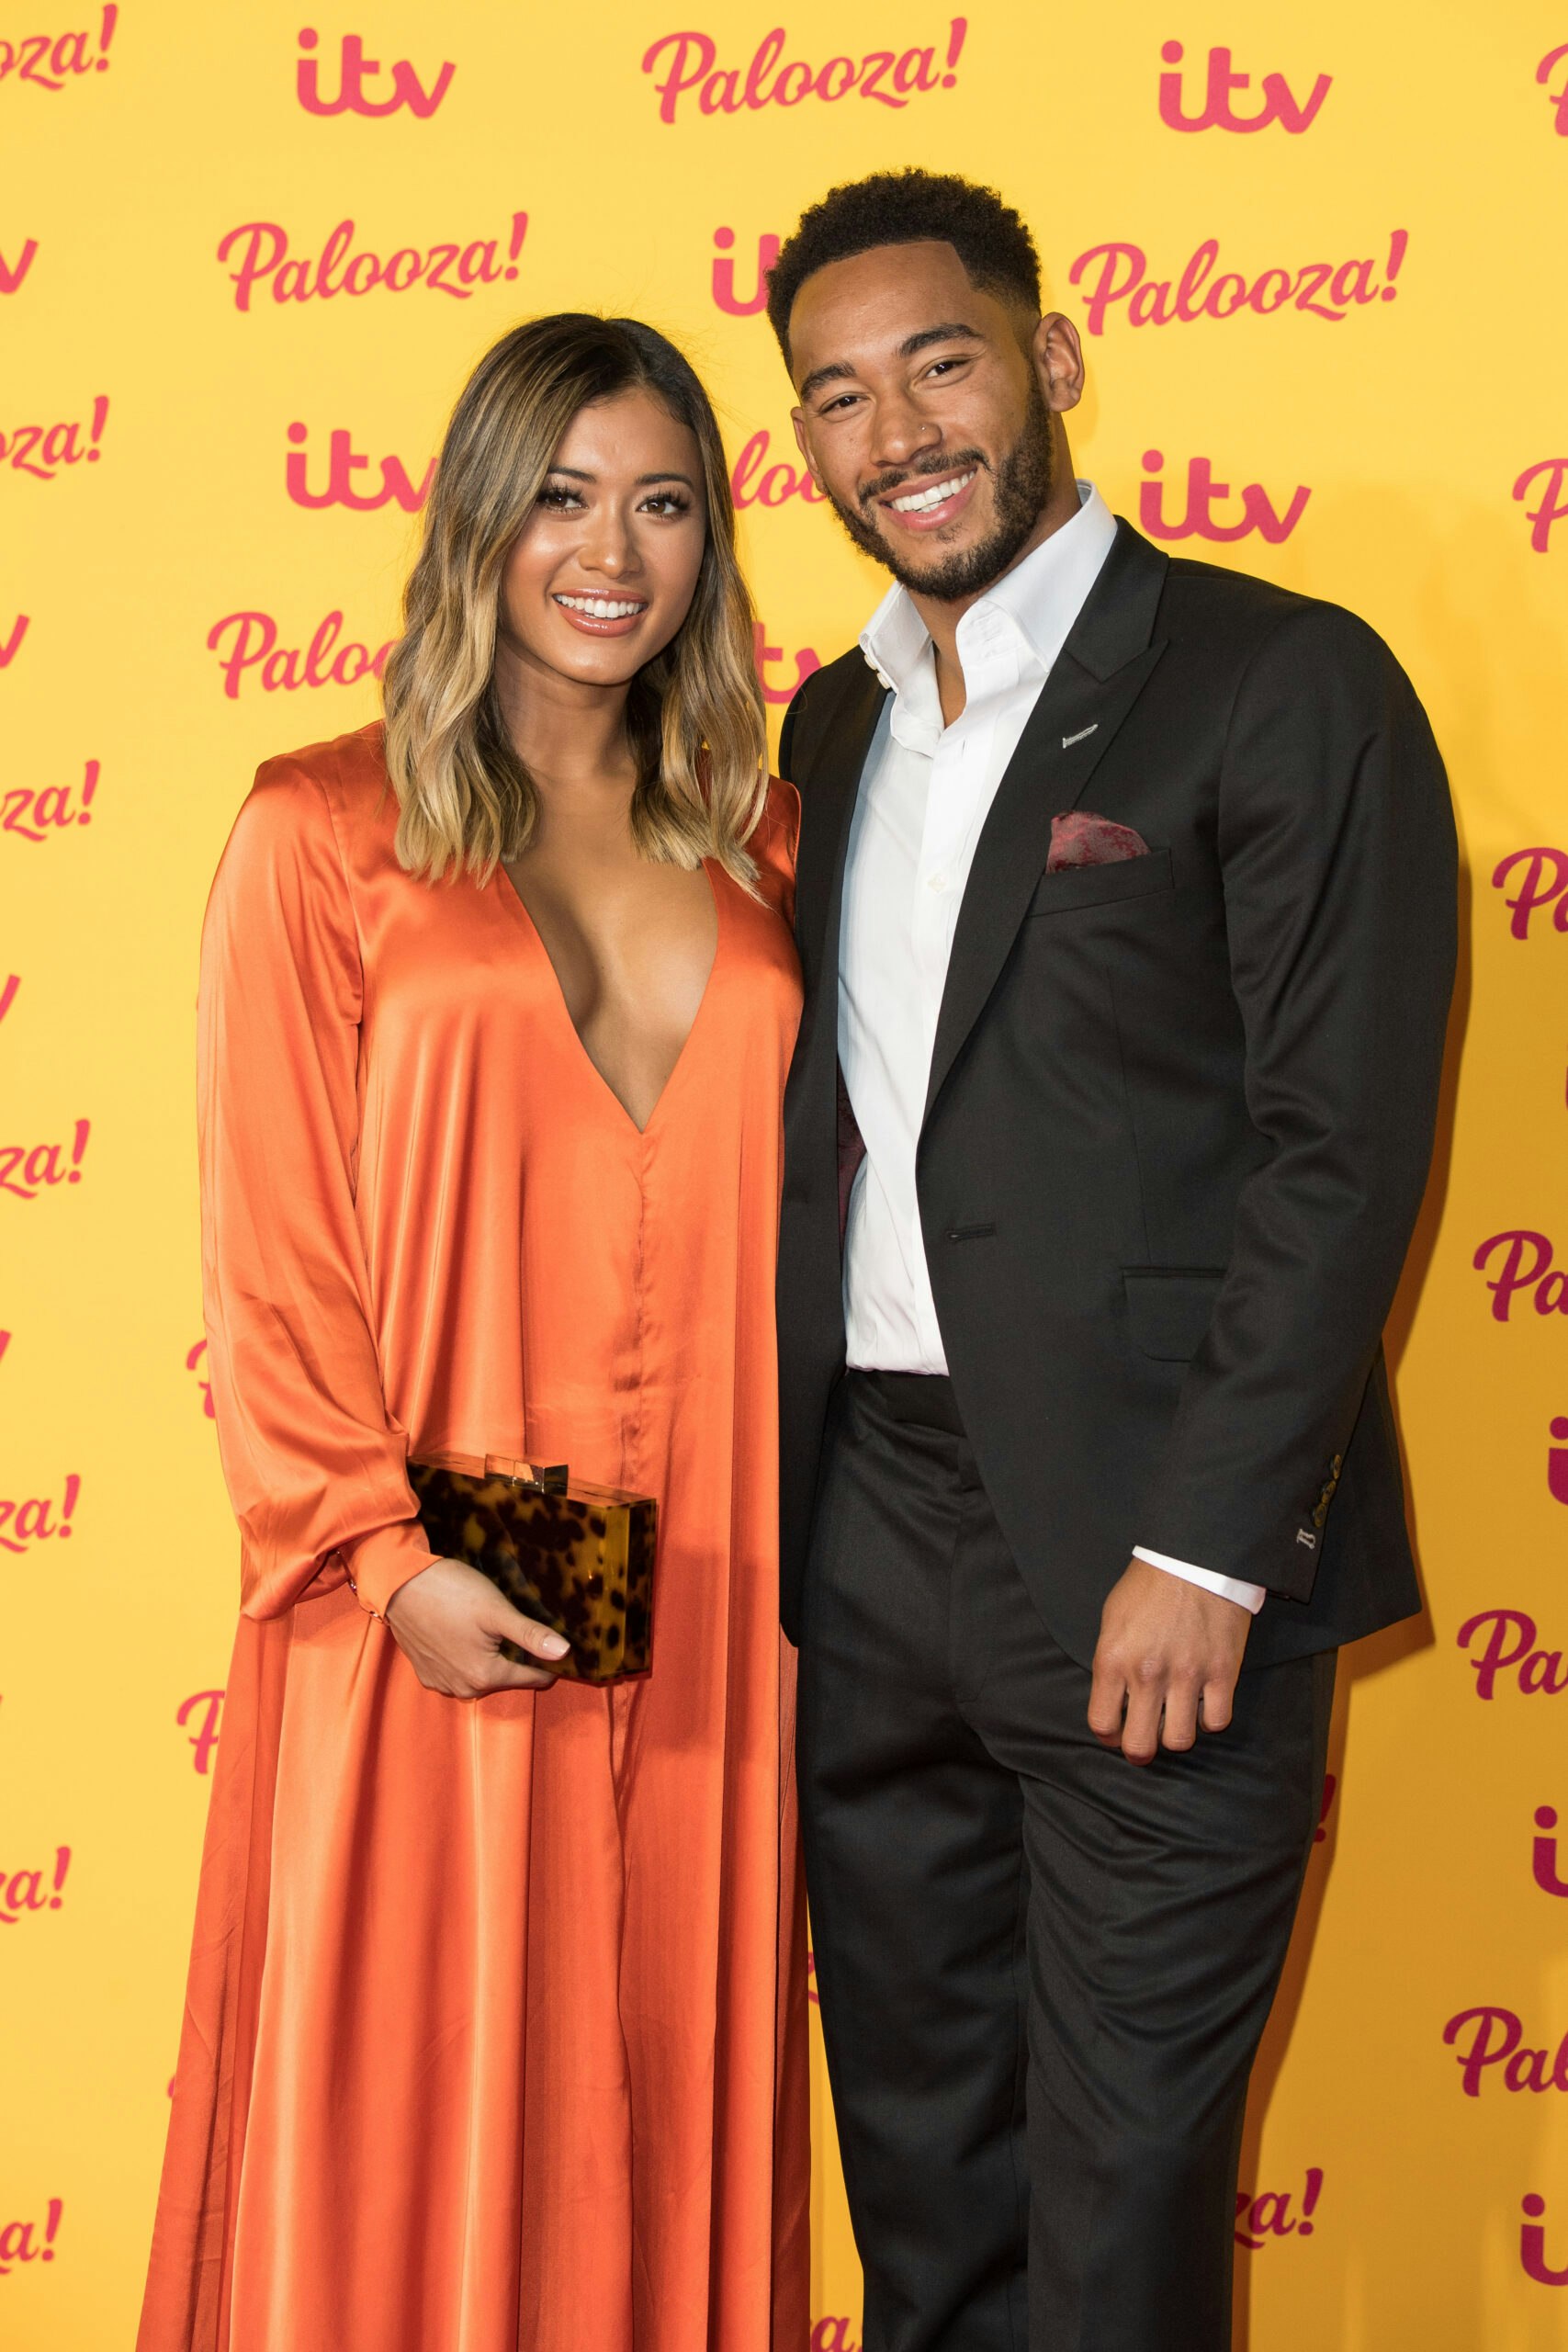 Kaz Crossley and Josh Denzel made it to the final of Love Island 2018 together